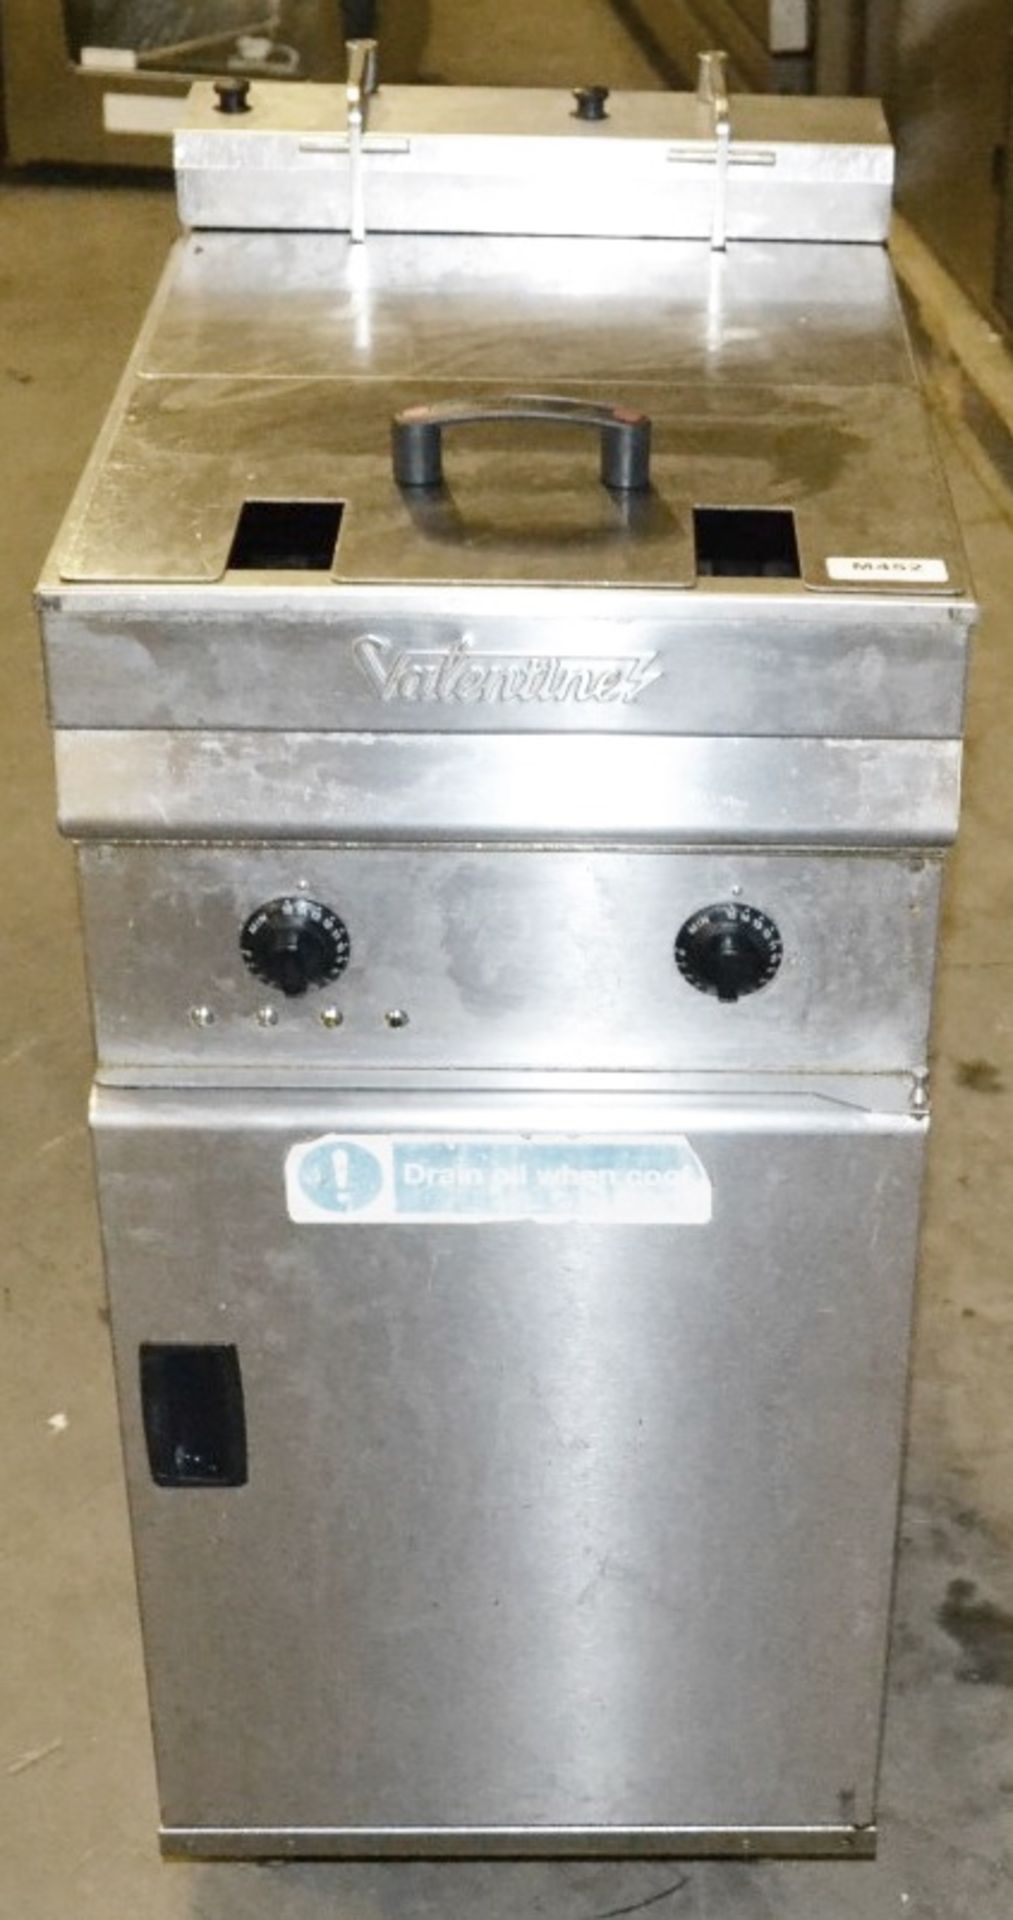 1 x Valentine Freestanding Electric Twin Basket Fryer - Approx 15 Litre Capacity - Easy Clean Stainl - Image 5 of 6